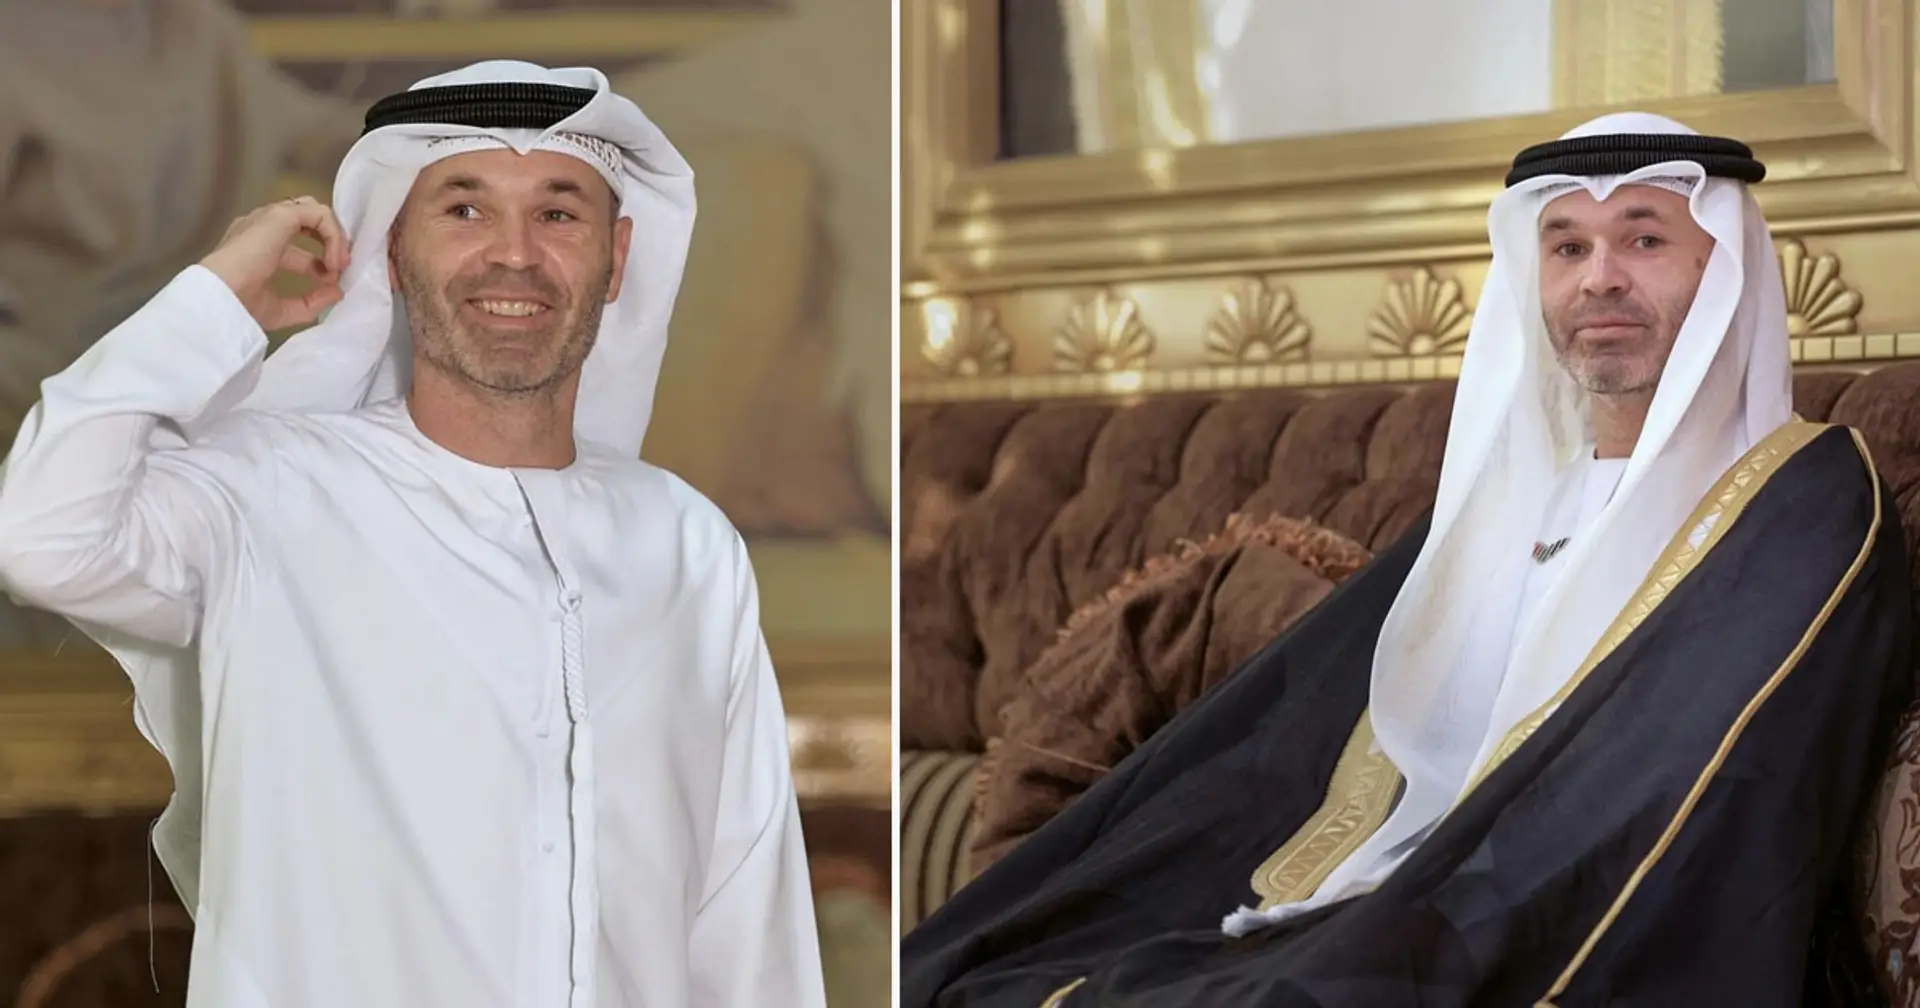 Iniesta poses in traditional Emirati dress: what does it mean?